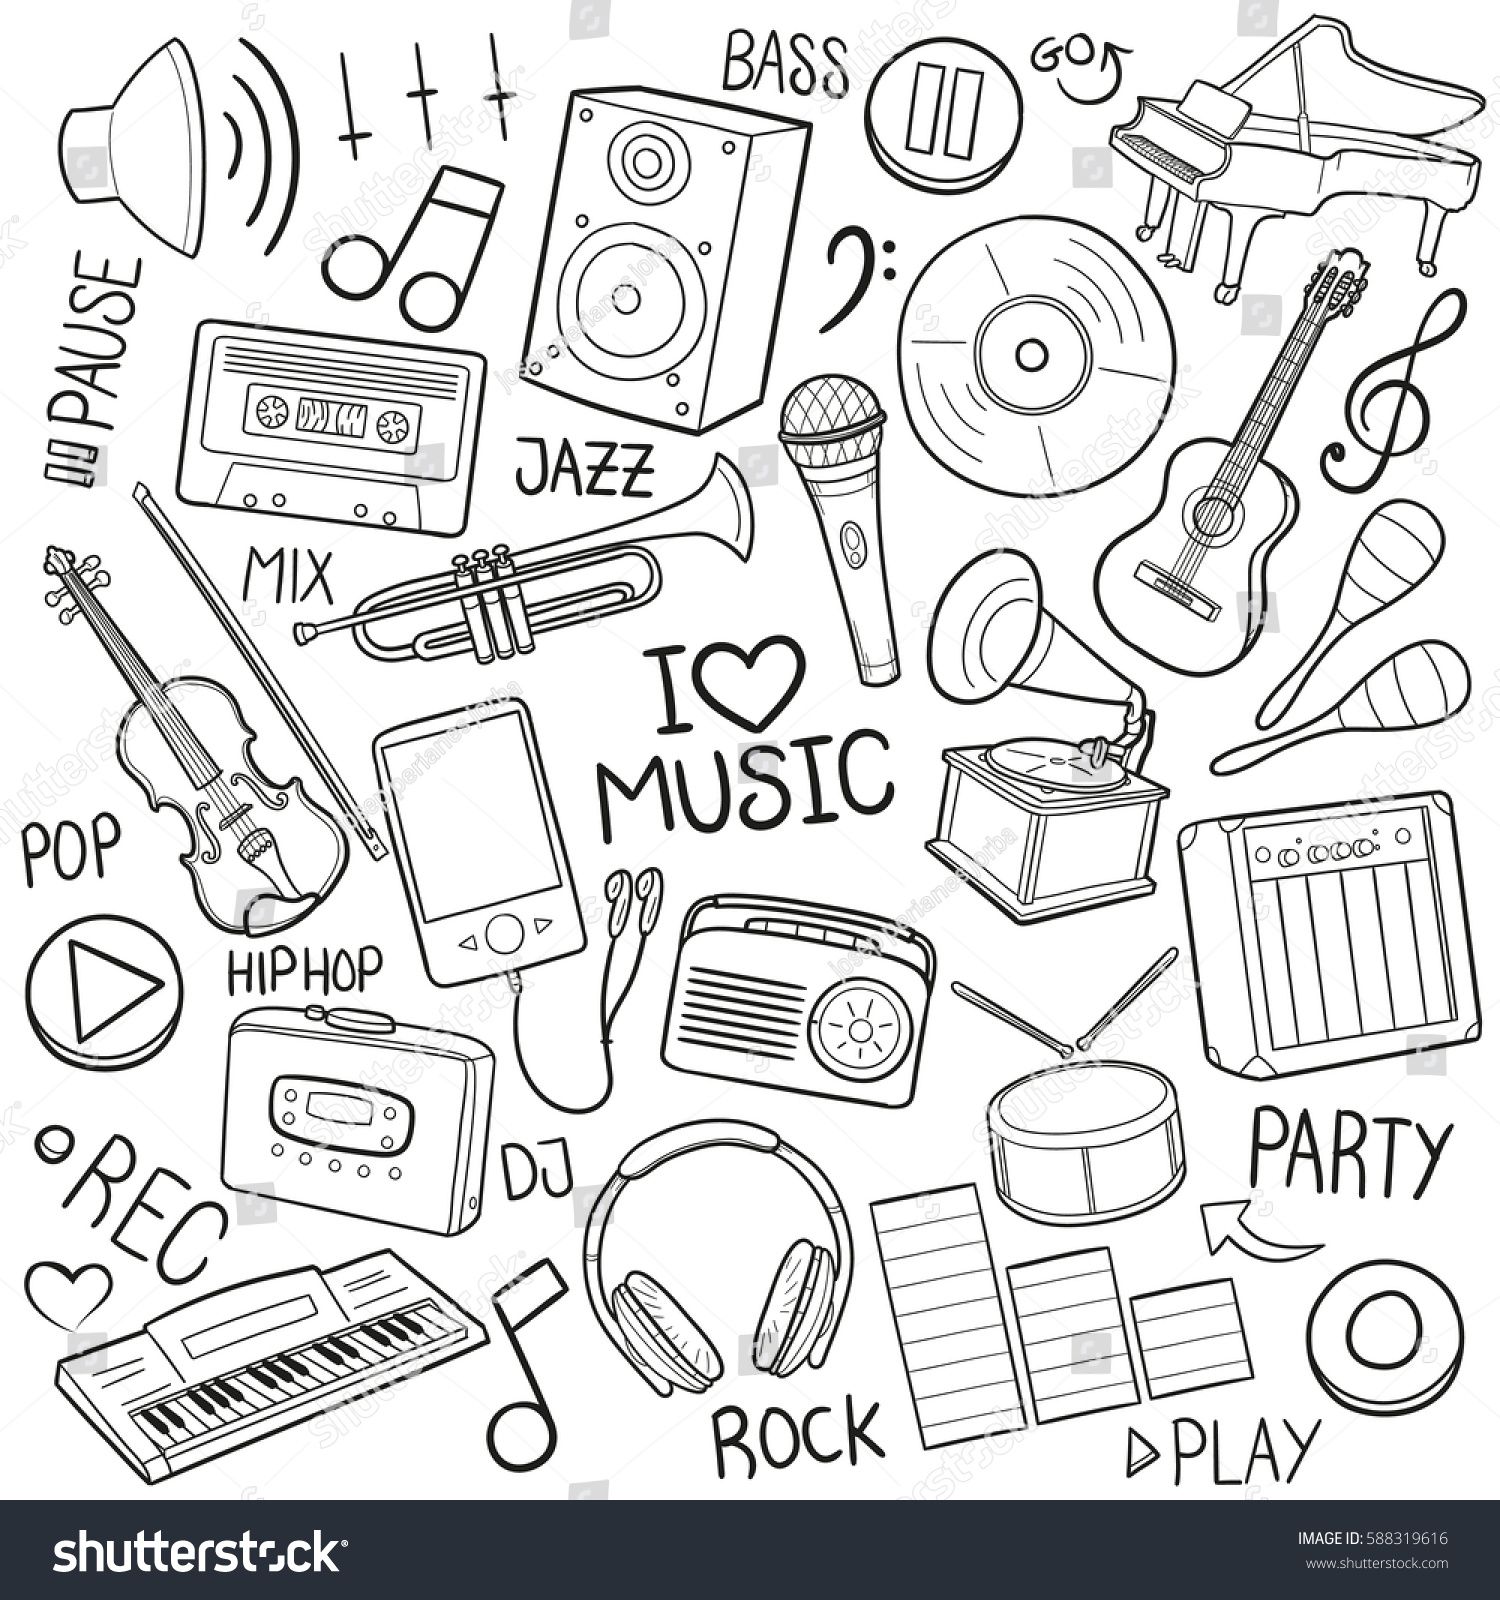 Music tools doodle.